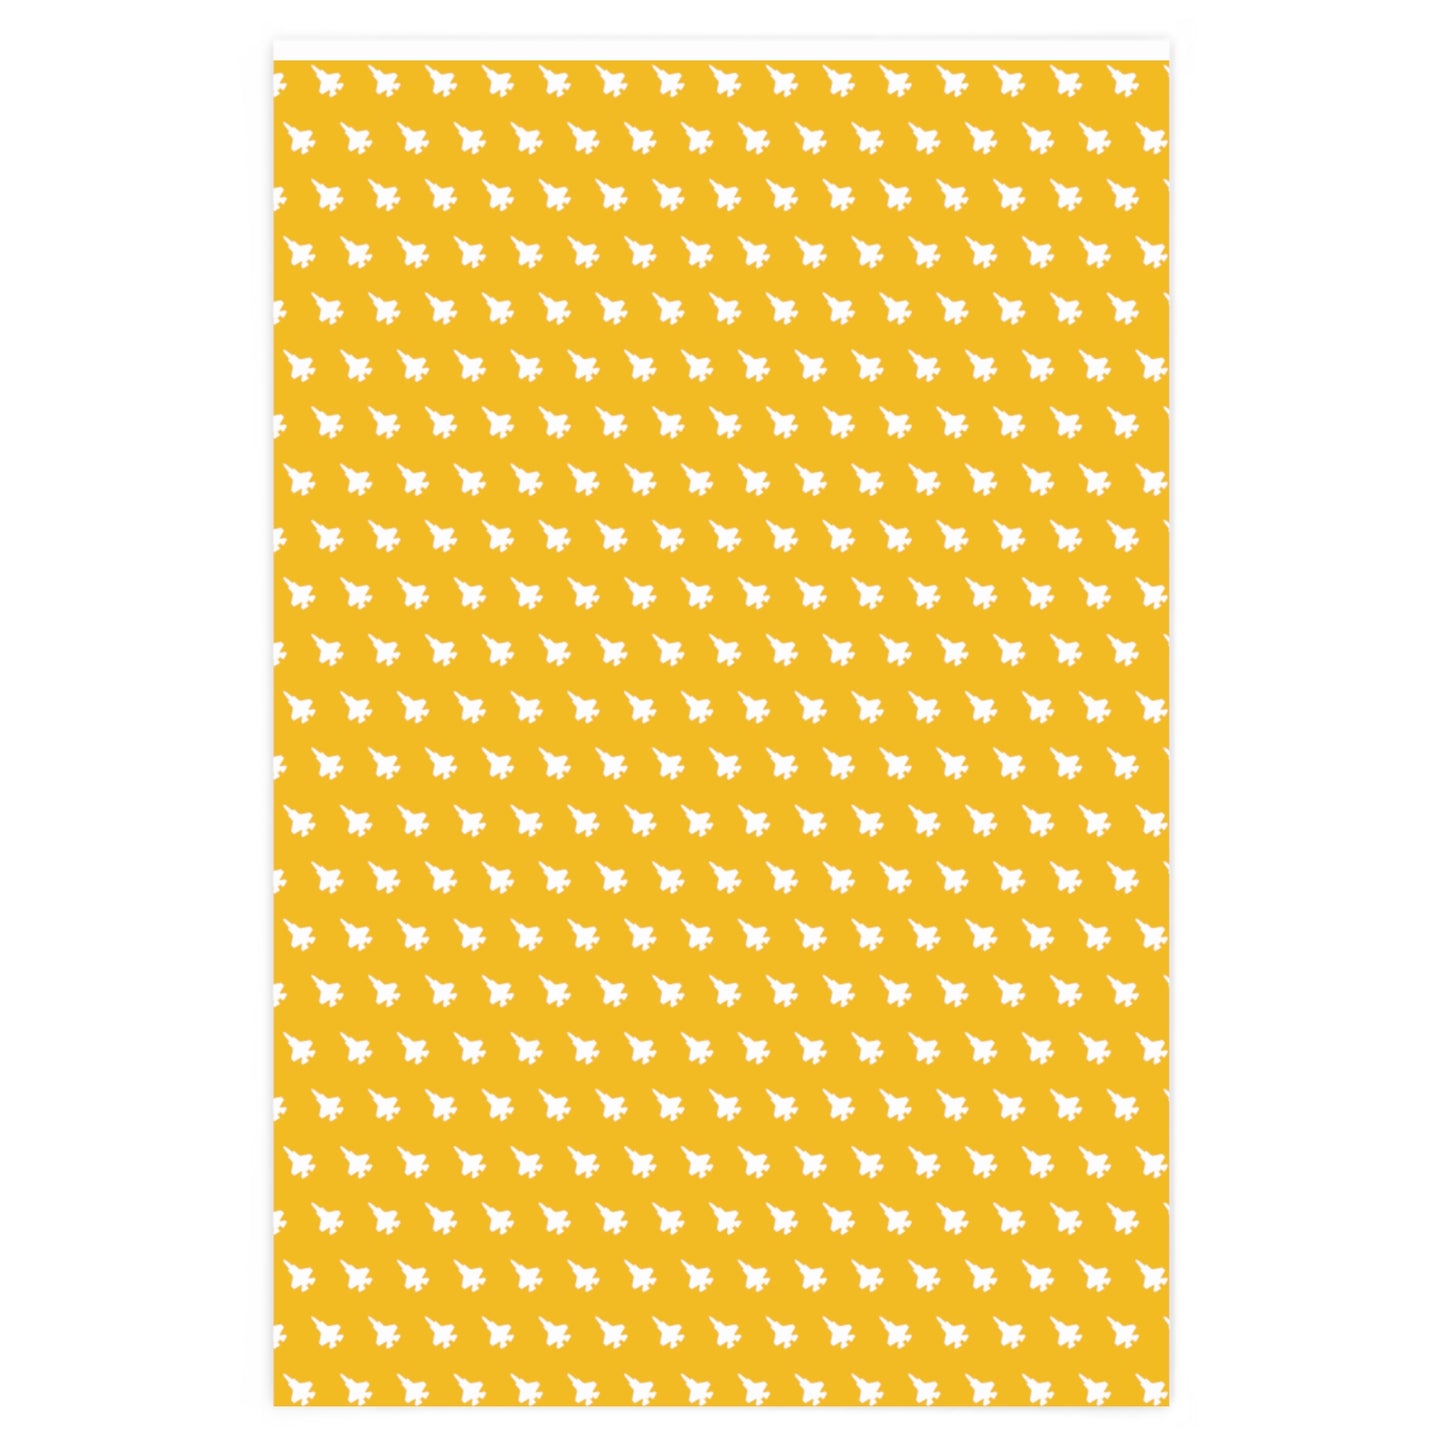 F-35 Wrapping Paper, Yellow